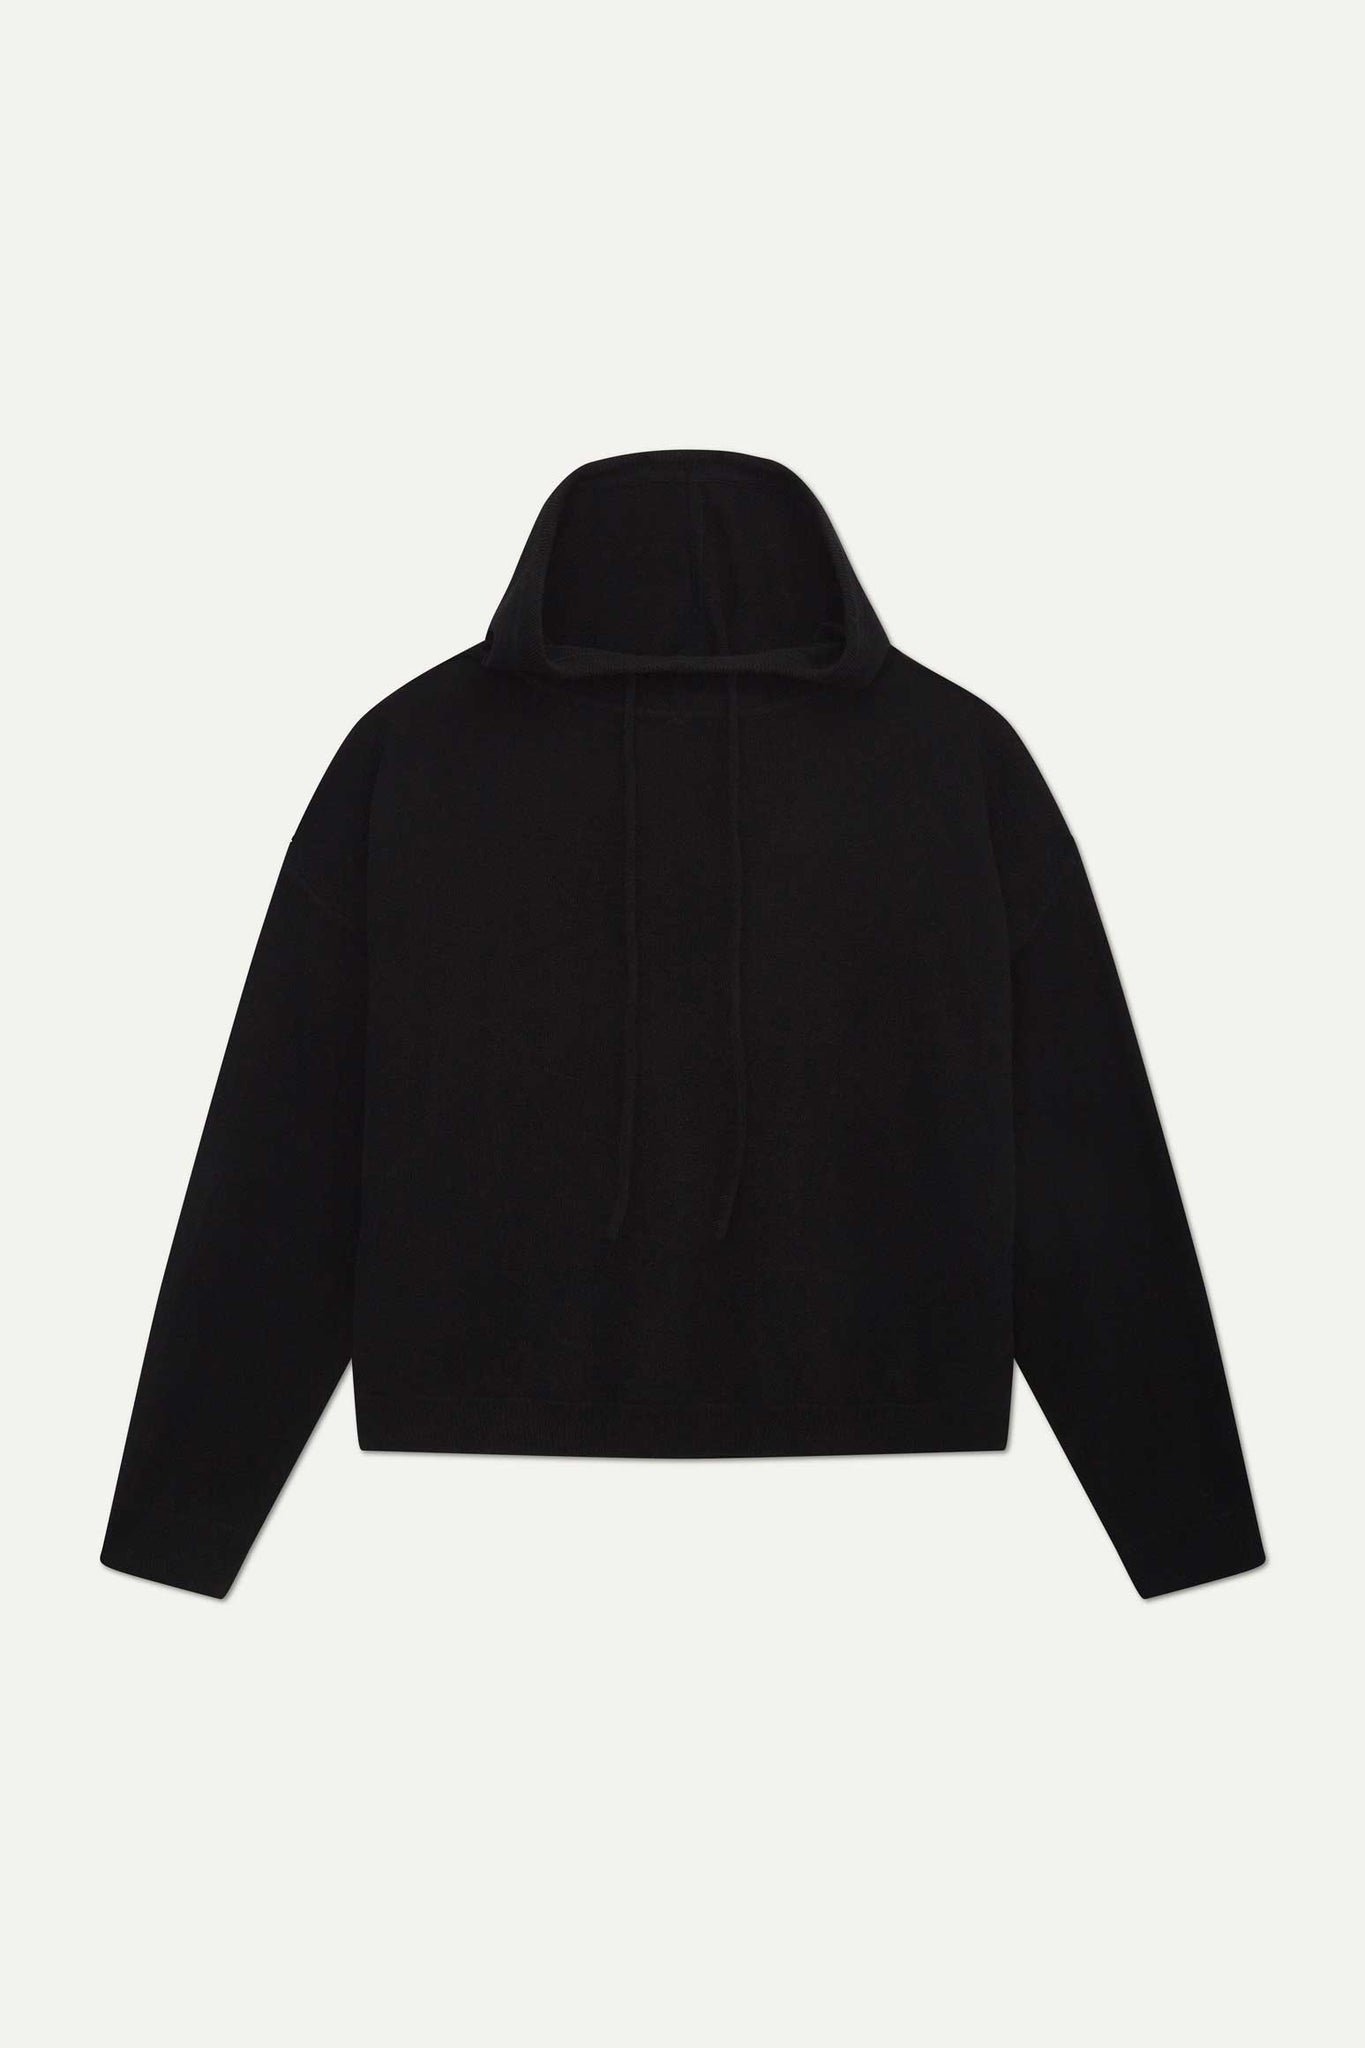 LINOSA CASHMERE HOODIE BY LOULOU STUDIO IN BLACK